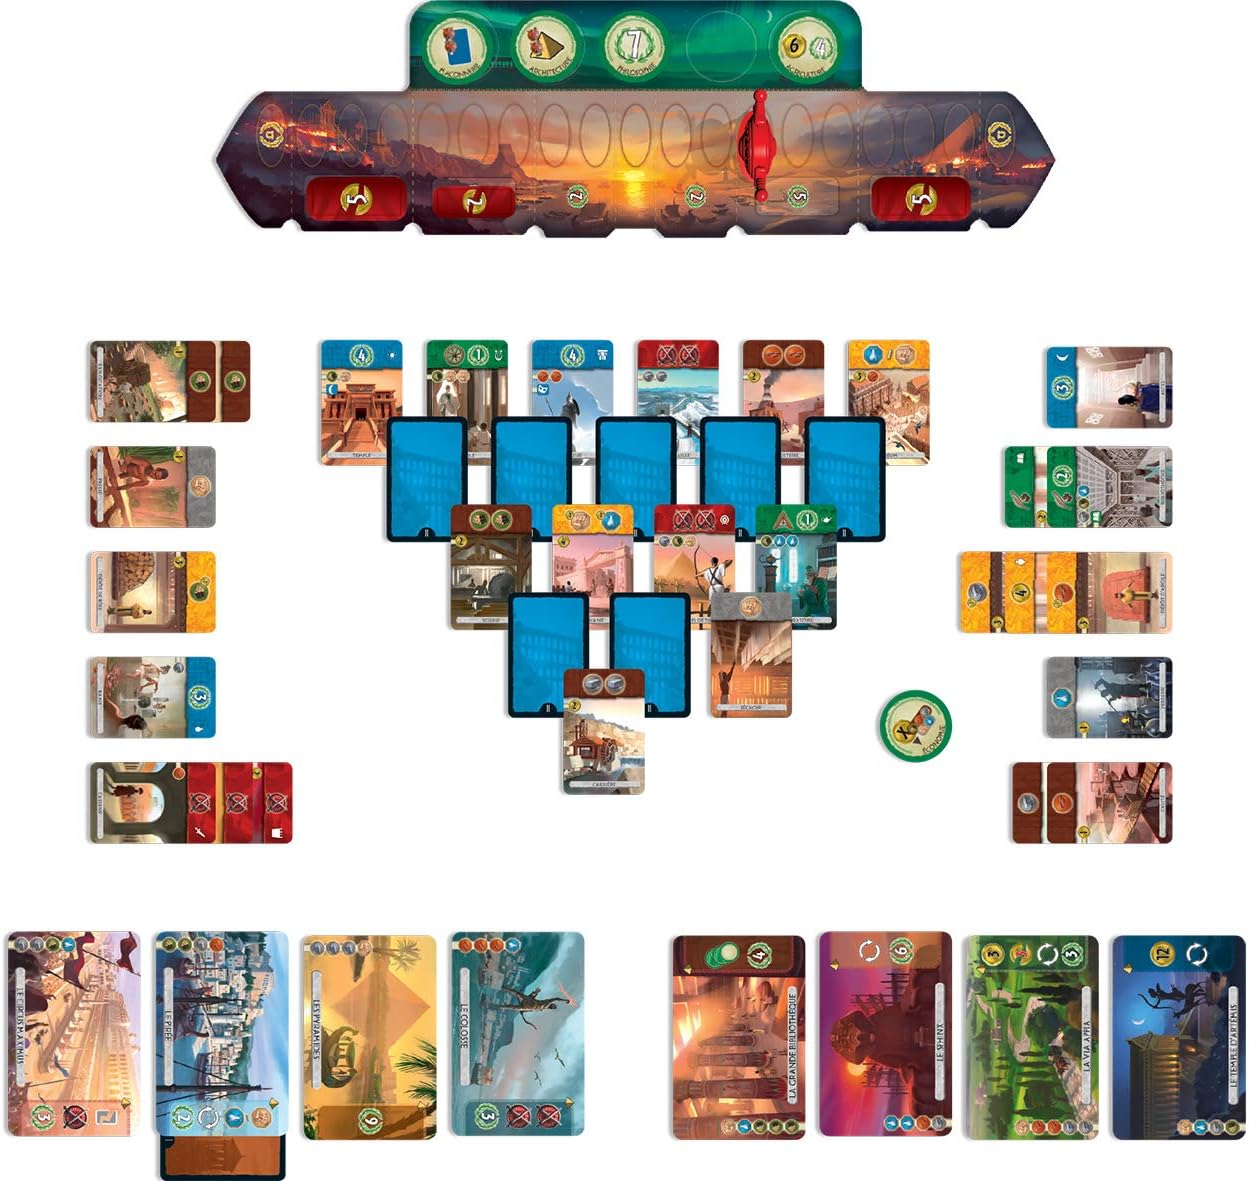 7 Wonders Duel Board Game (BASE GAME) for 2 Players Strategy Civilization Fun Board Game